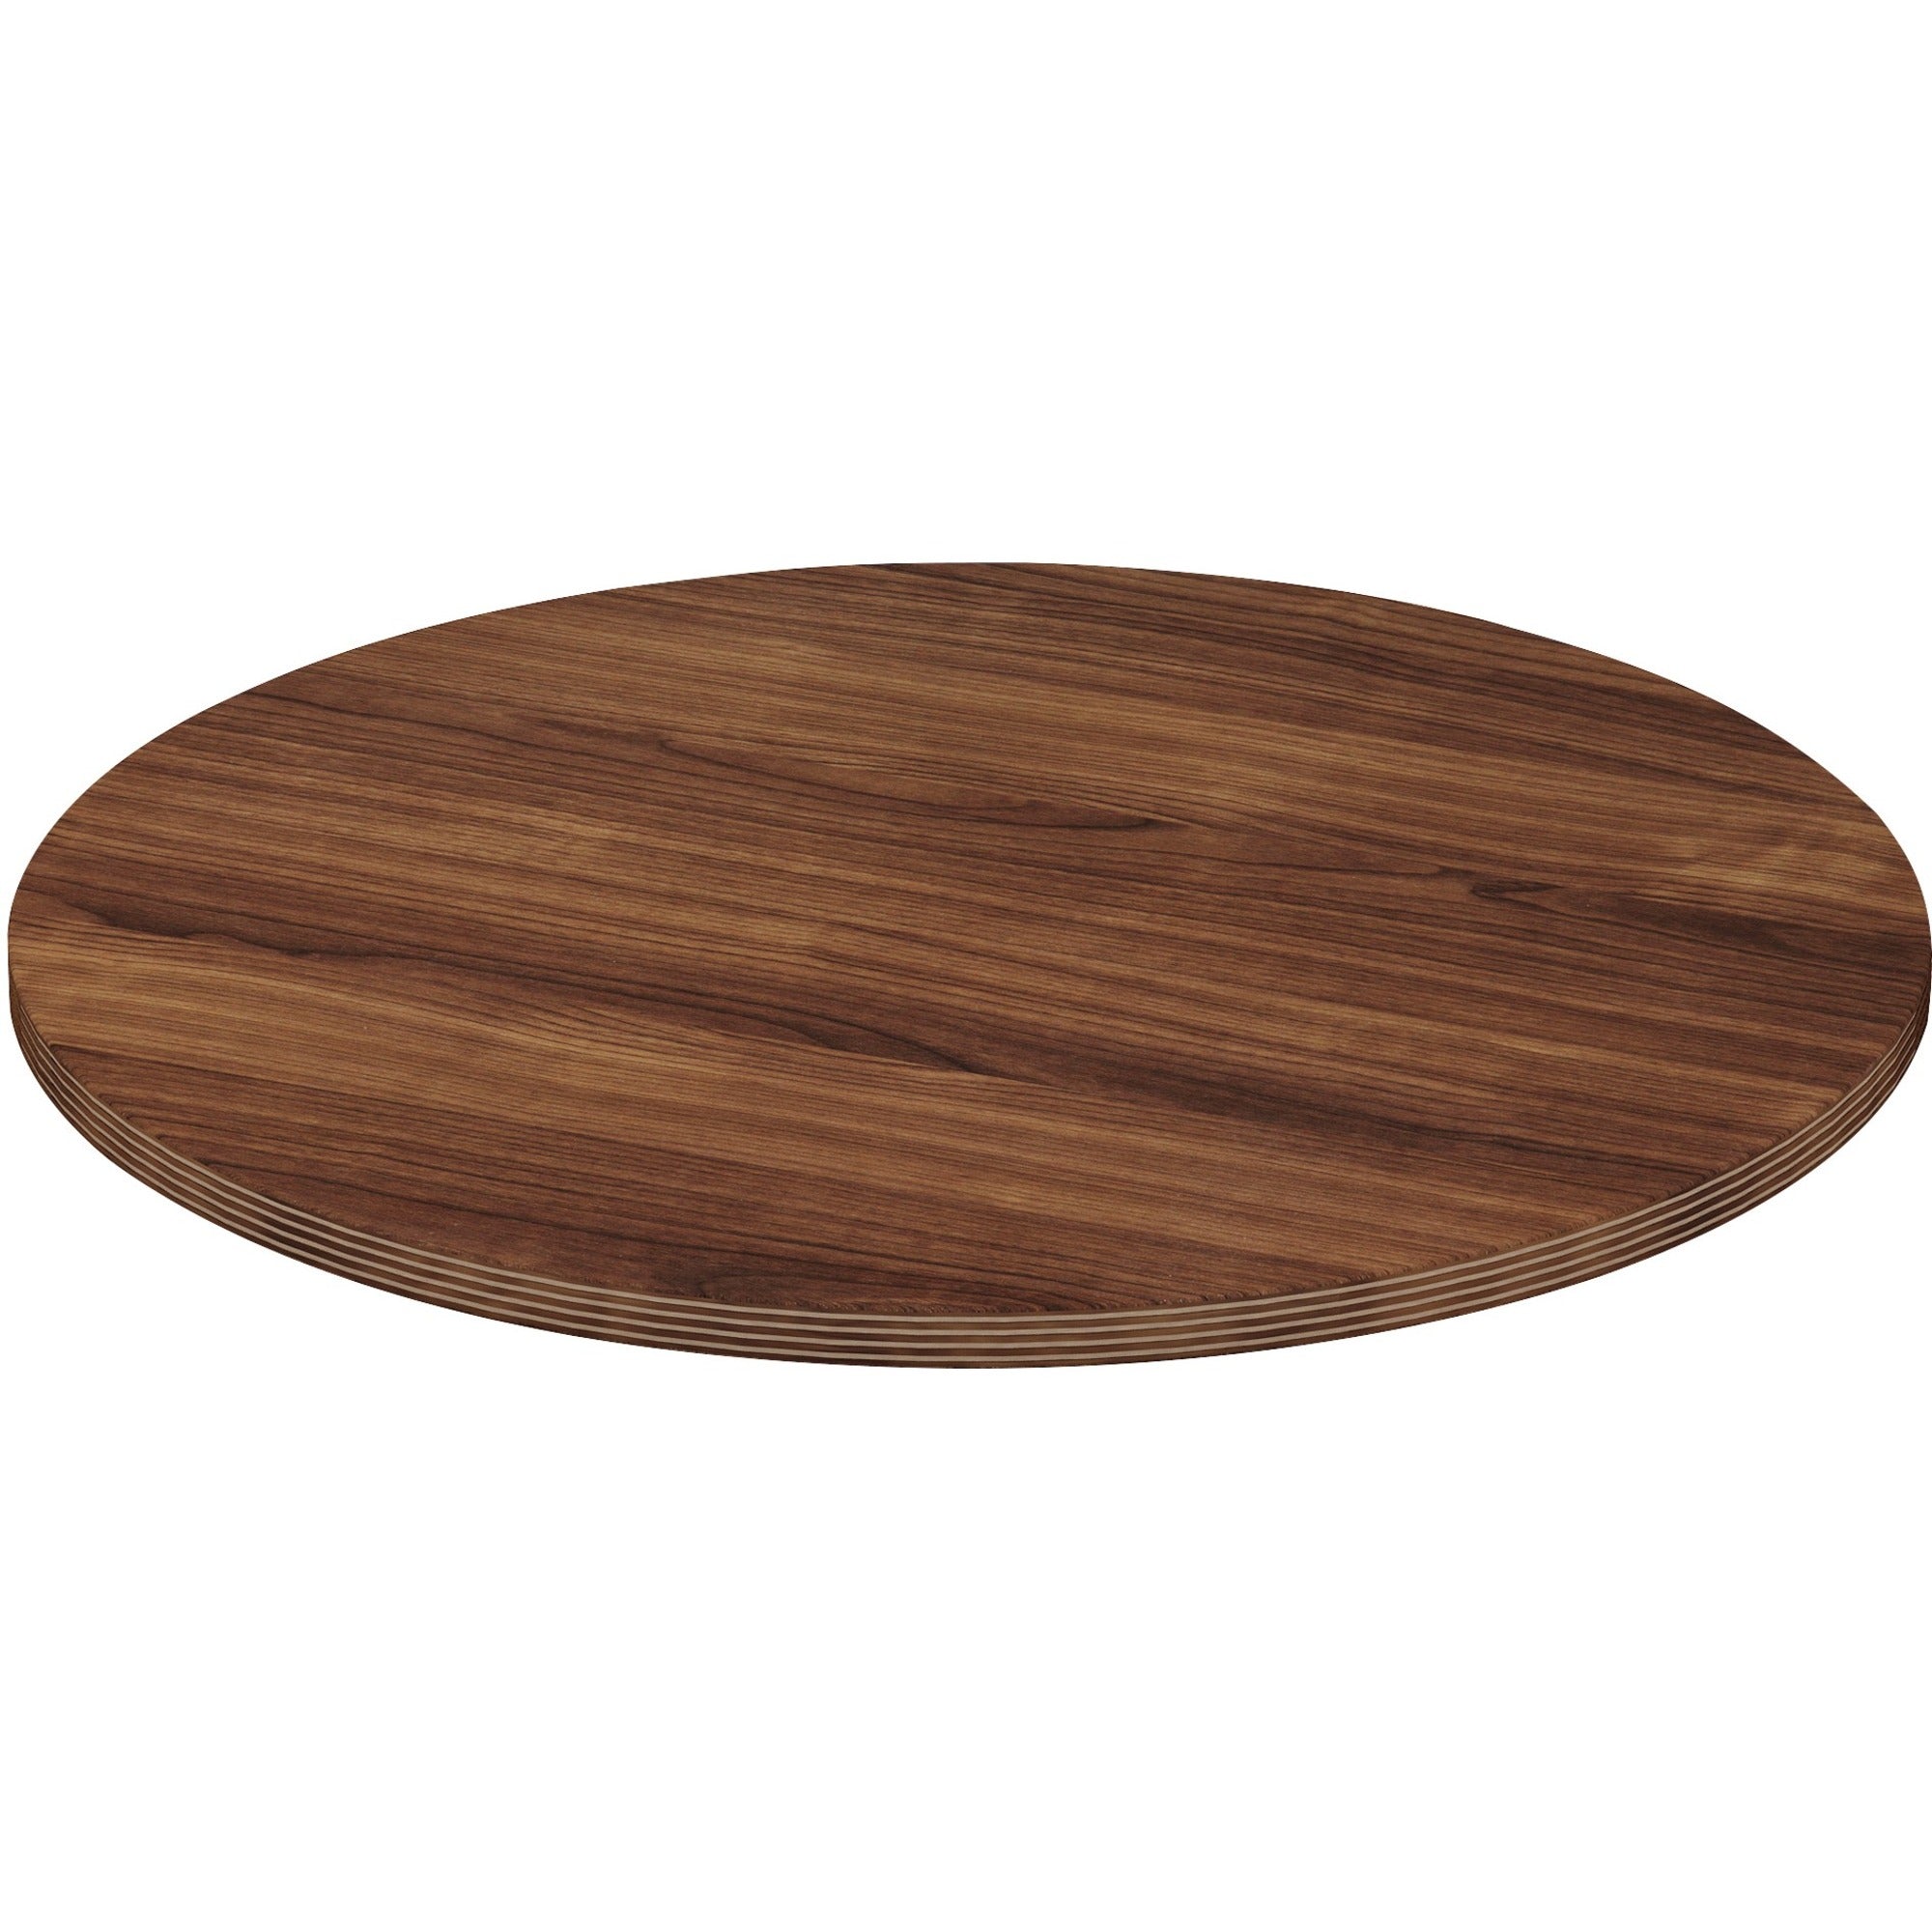 lorell-chateau-series-round-conference-tabletop-1448--01-edge-reeded-edge-finish-walnut-laminate_llr34359 - 1